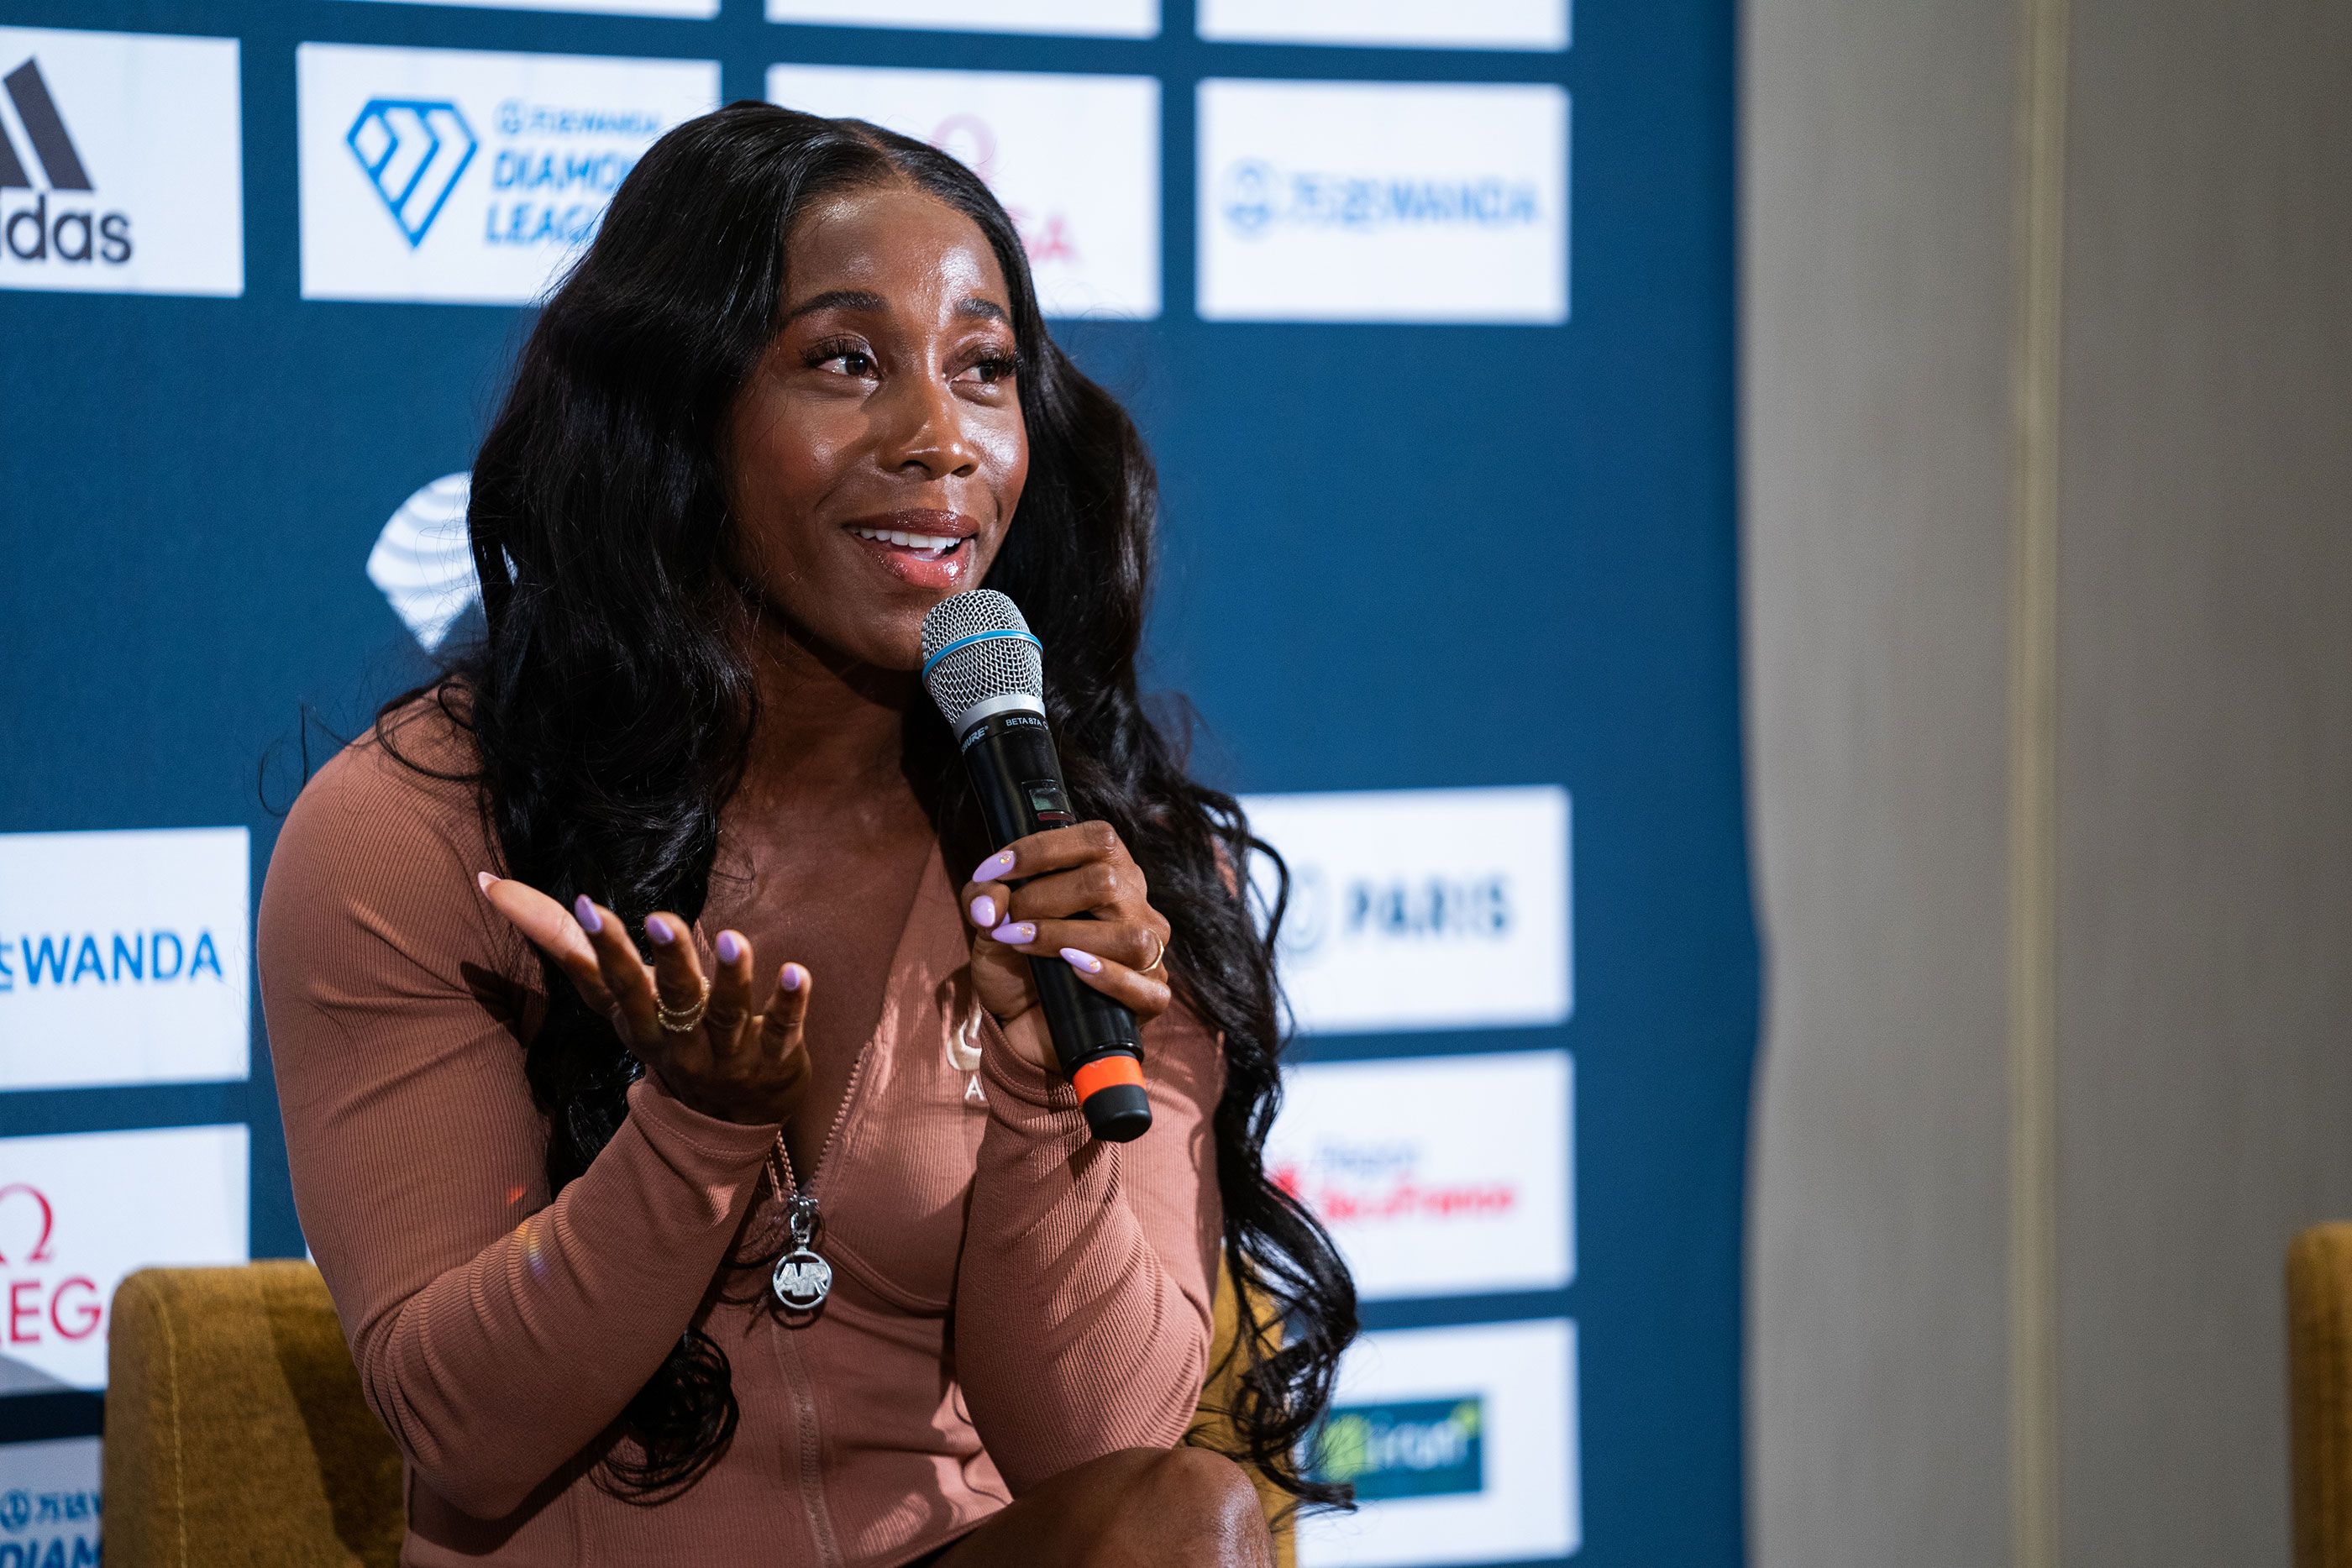 Shelly-Ann Fraser-Pryce at the Wanda Diamond League press conference in Paris